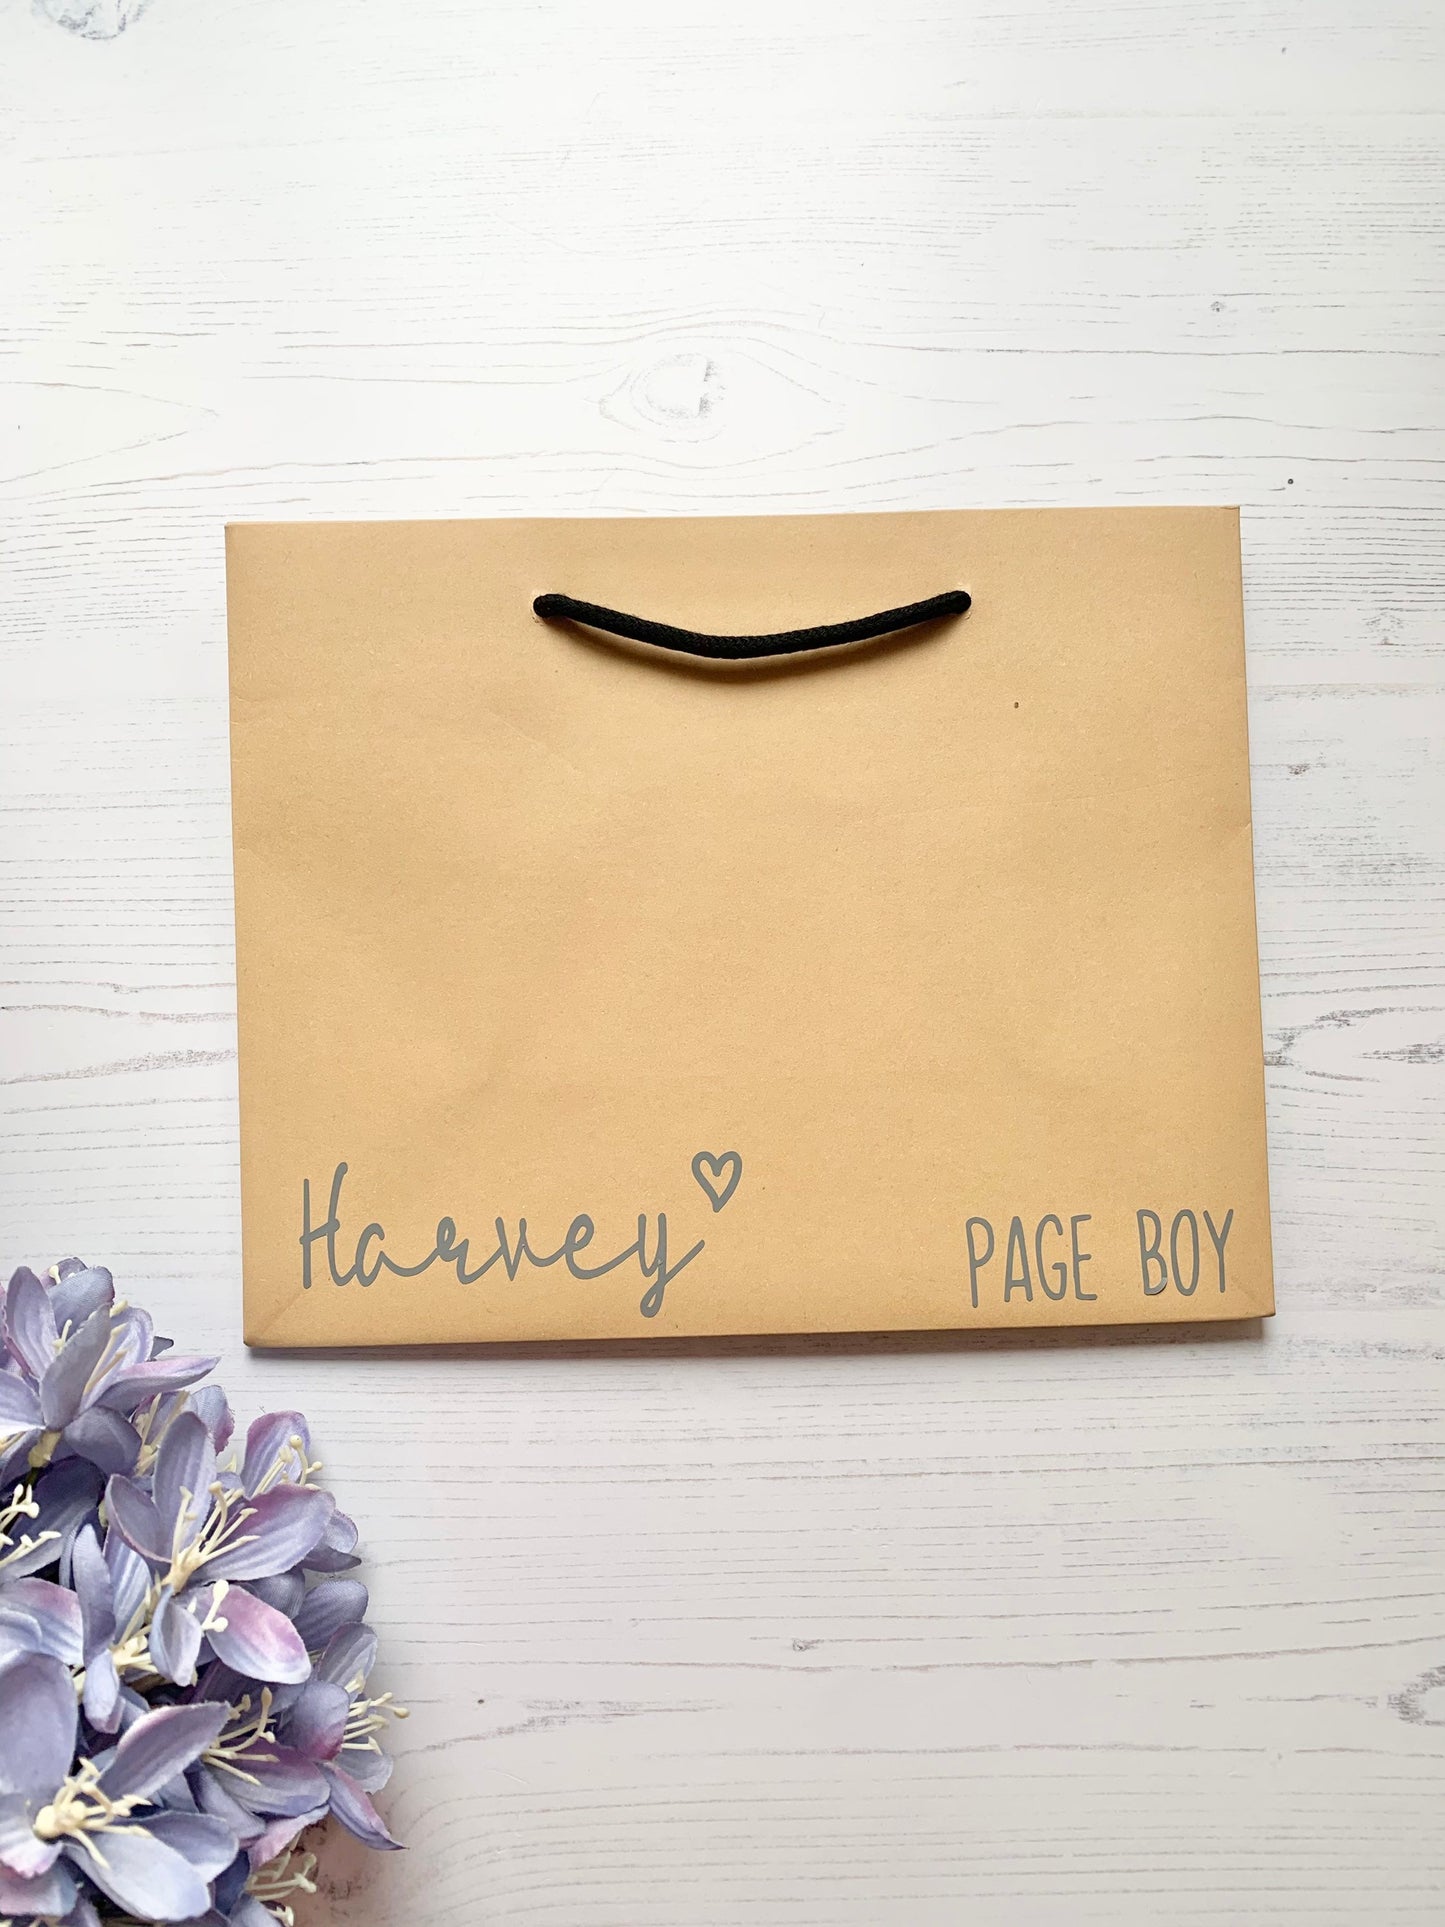 Personalised gift bag, bridesmaid gift bags, luxury brown kraft gift bags, bridesmaid gifts, flower girl gift, page boy, best man gift bag